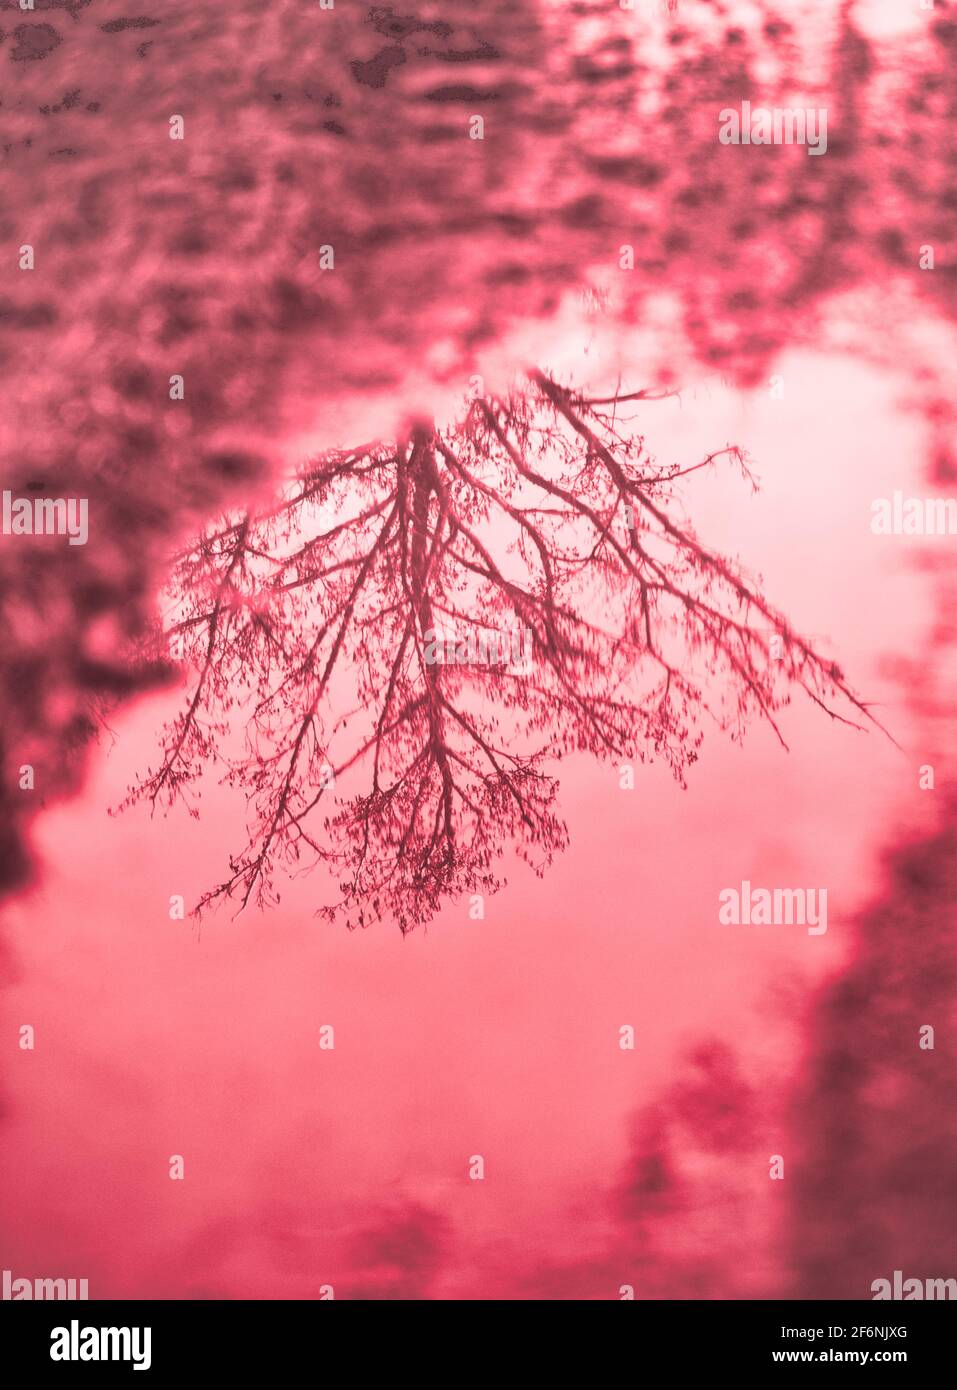 Red tinted image of tree branches reflected in puddle of rainwater on muddy path. Concept of tranquility, change, different, nonconformity Stock Photo